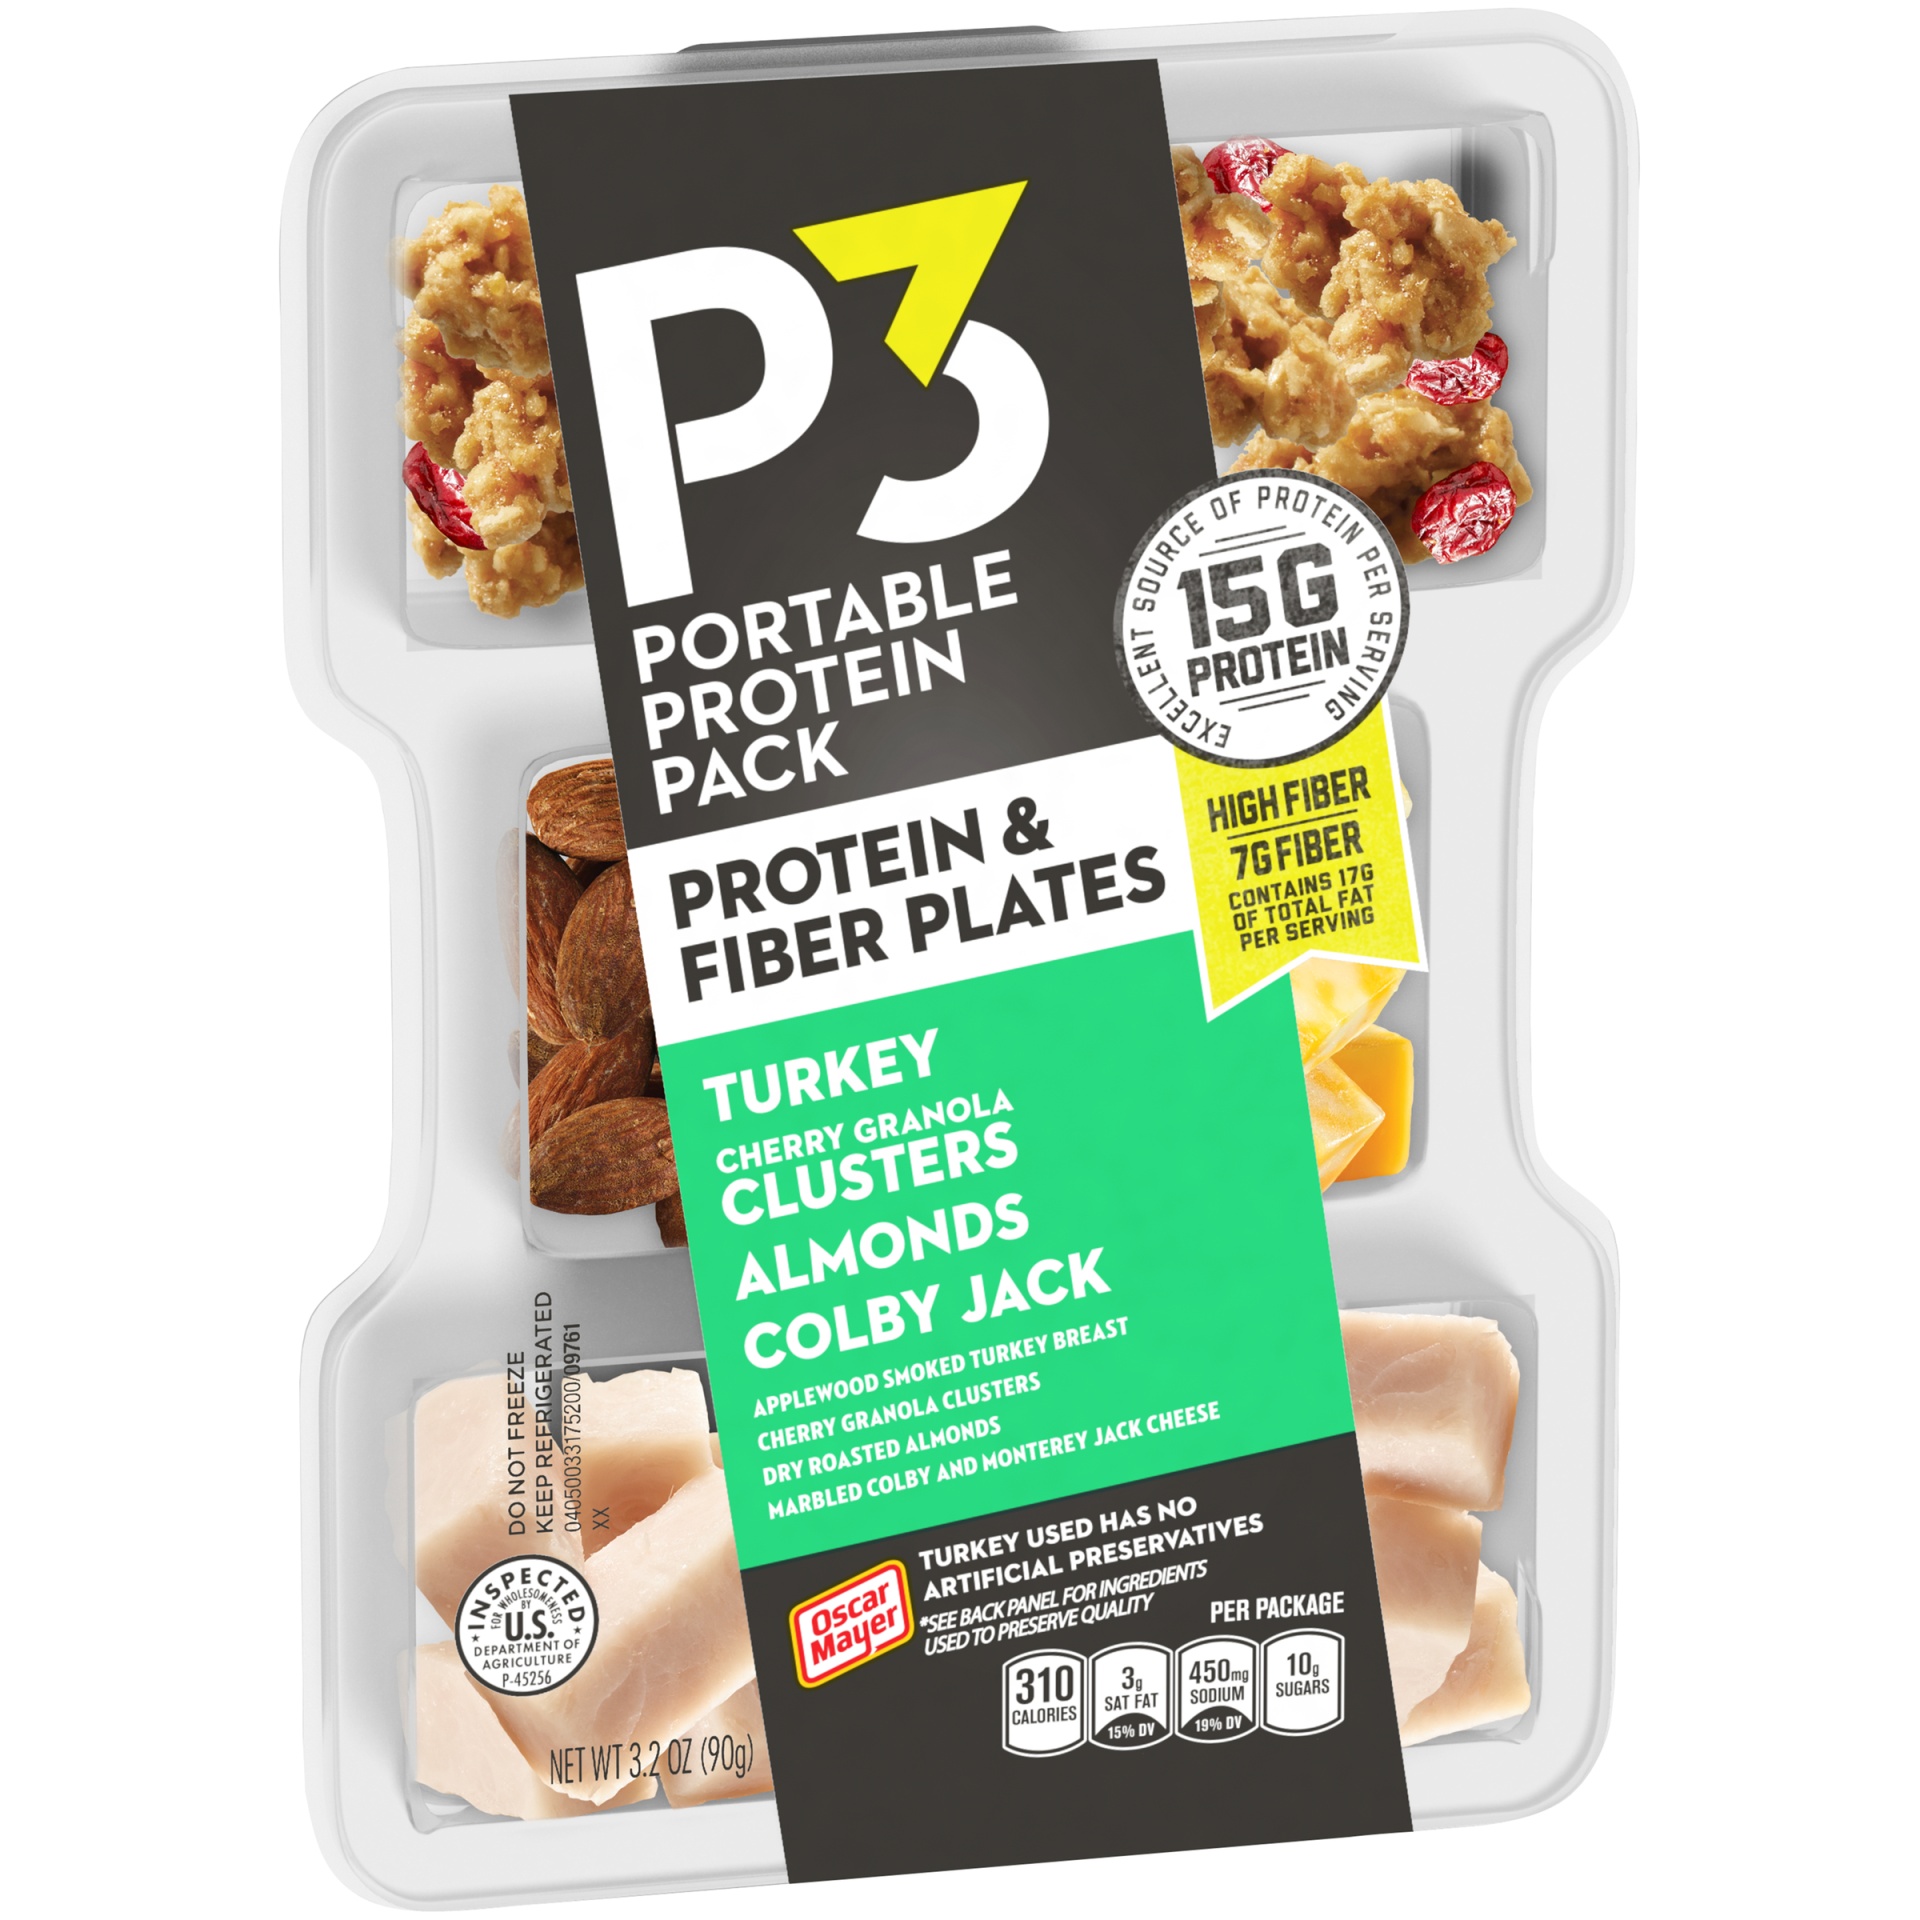 slide 2 of 6, P3 Portable Protein Snack Pack & Fiber Plate with Turkey, Cherry Granola Clusters, Almonds & Colby Jack Cheese Tray, 3.2 oz